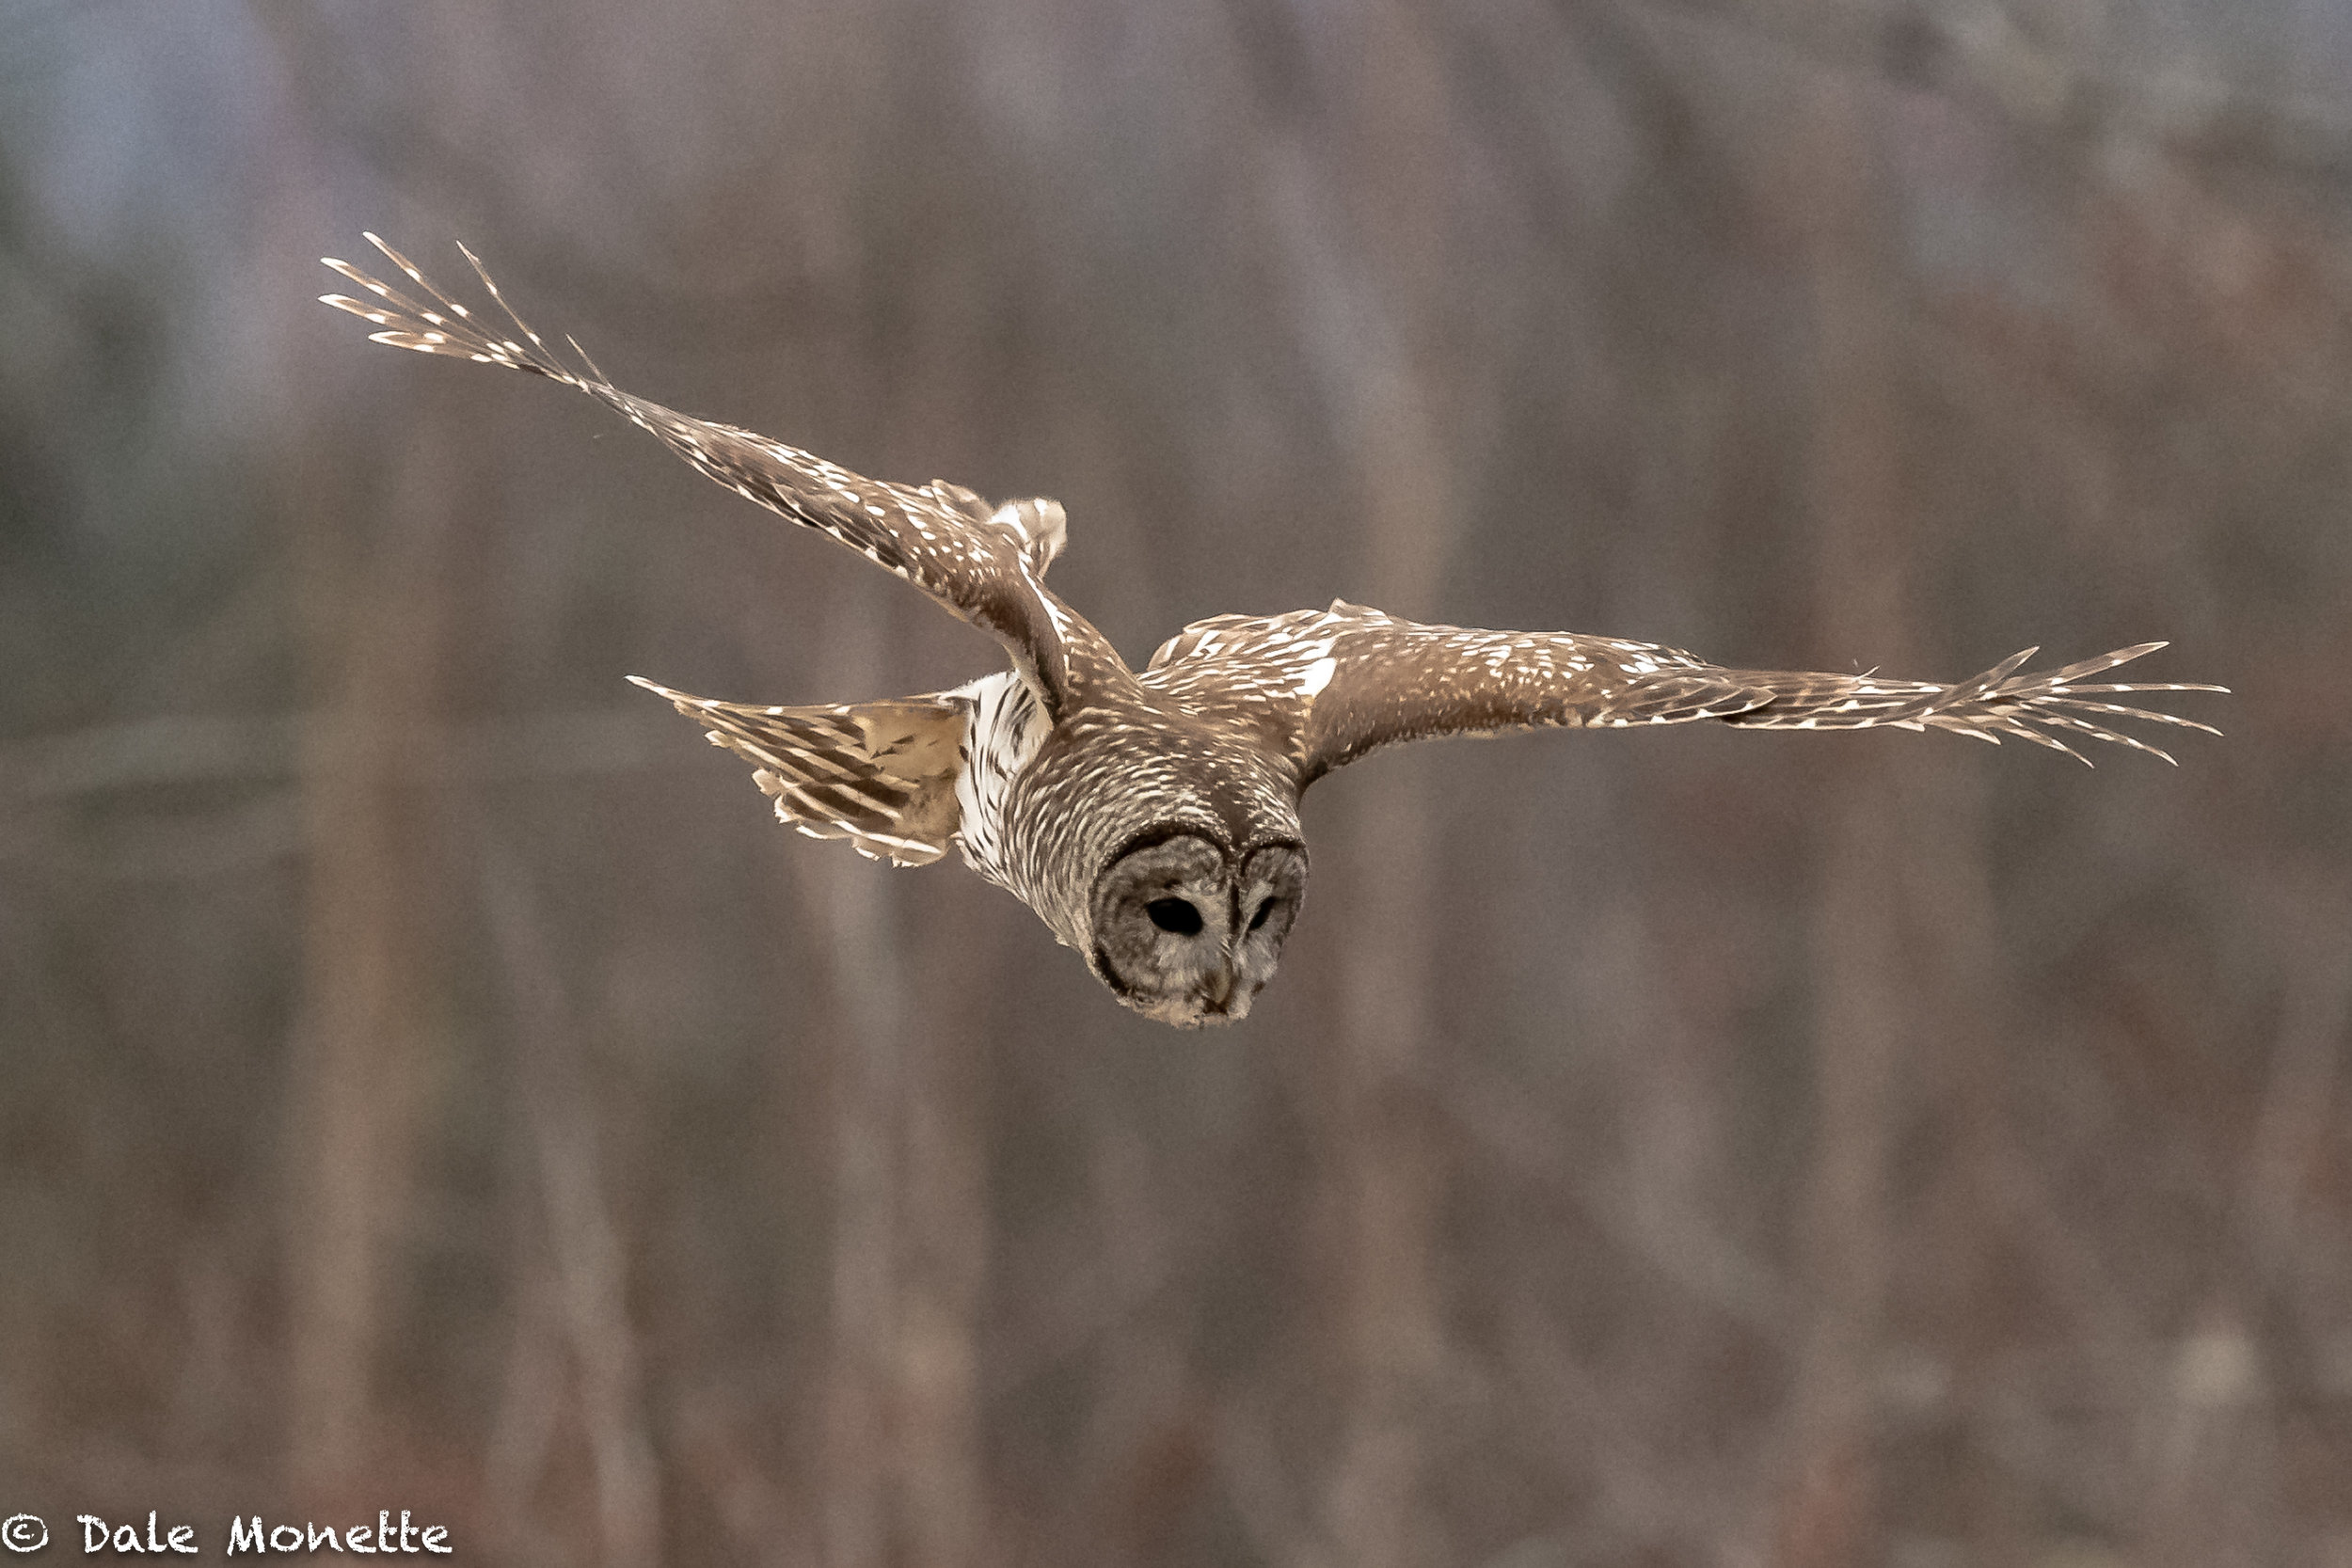   Barred owl,  or better known as a flying mouse trap !     